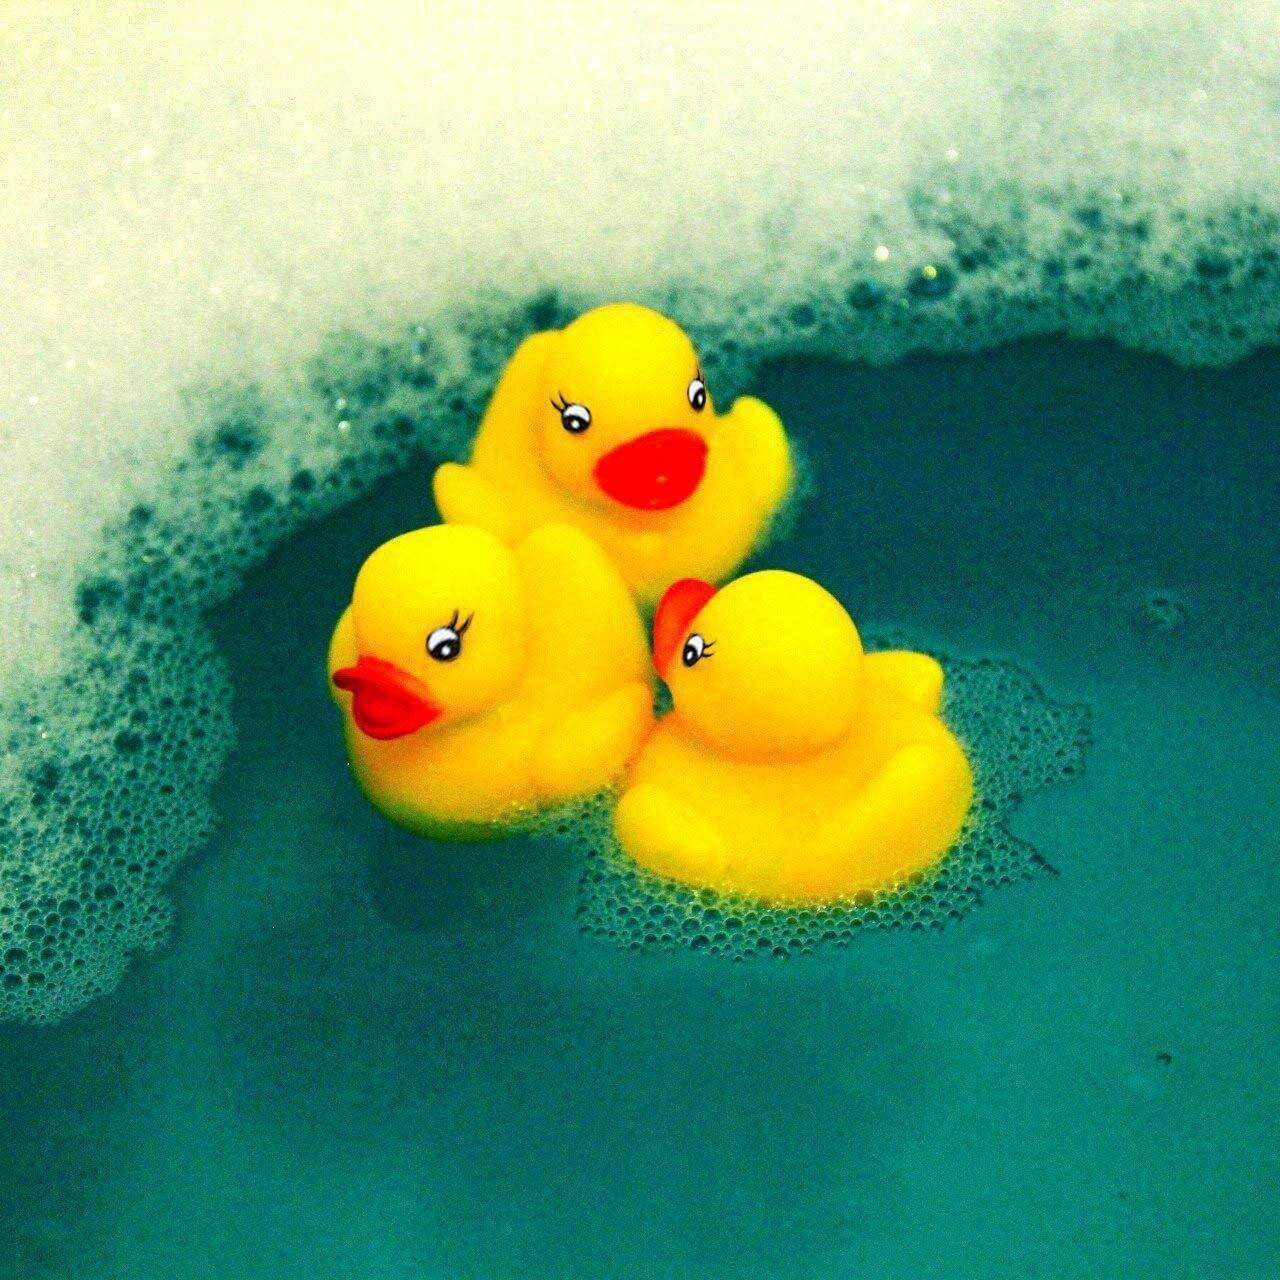 Novelty Place 12-48 Pcs Float Rubber Duck Ducky Baby Bath Toy for Kids Novelty Place Does Not Apply - фотография #5